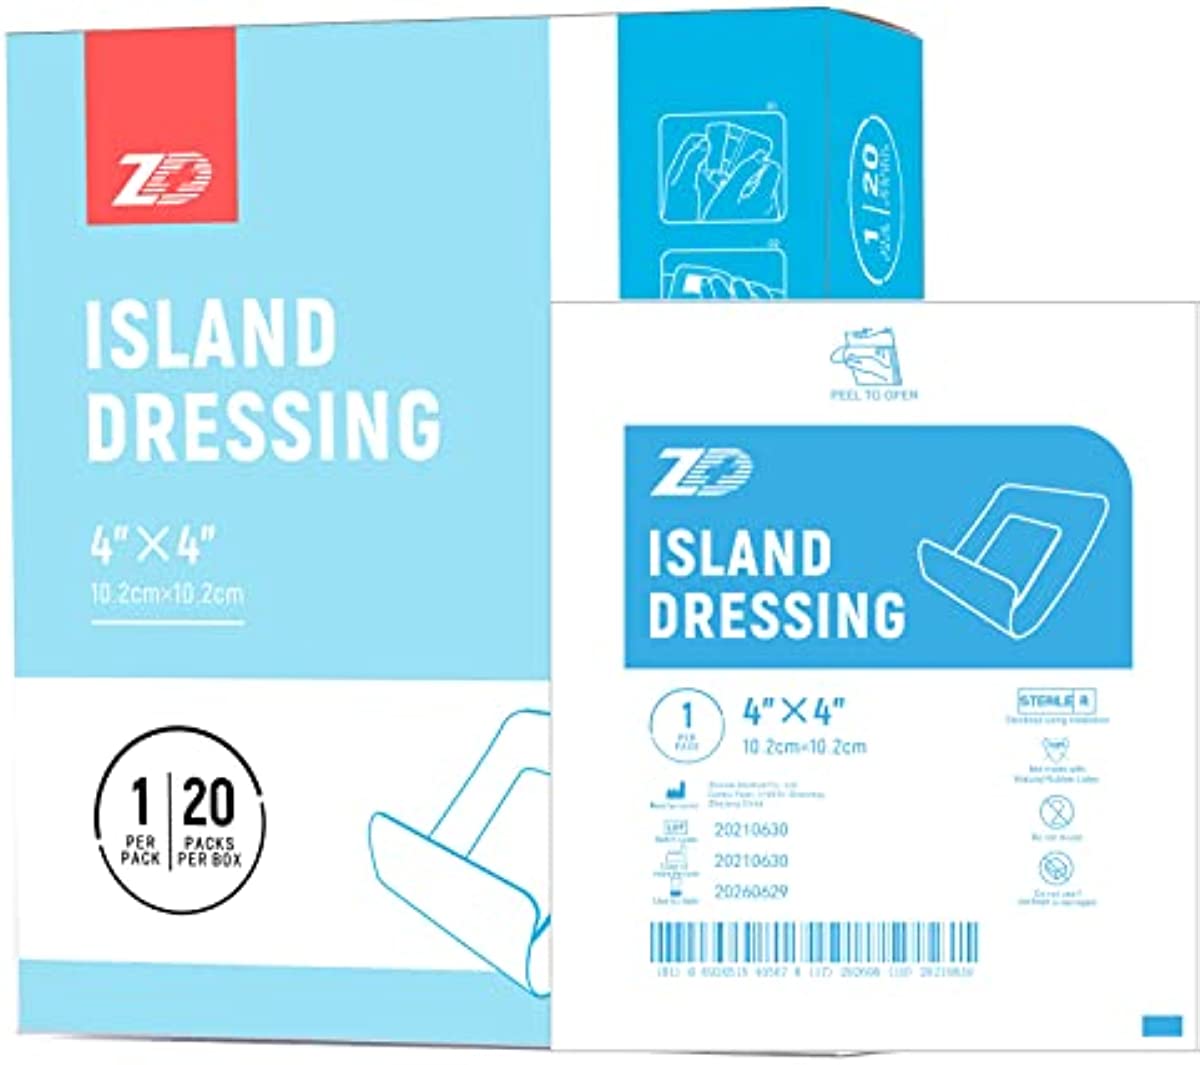 ZD Island Dressing Adhesive Gauze Island Wound Care Bandage with Adhesive Border| Sterile, Soft & Highly Absorbent Medical Grade Dressing Pad 4x4 Inch (Pack of 20)